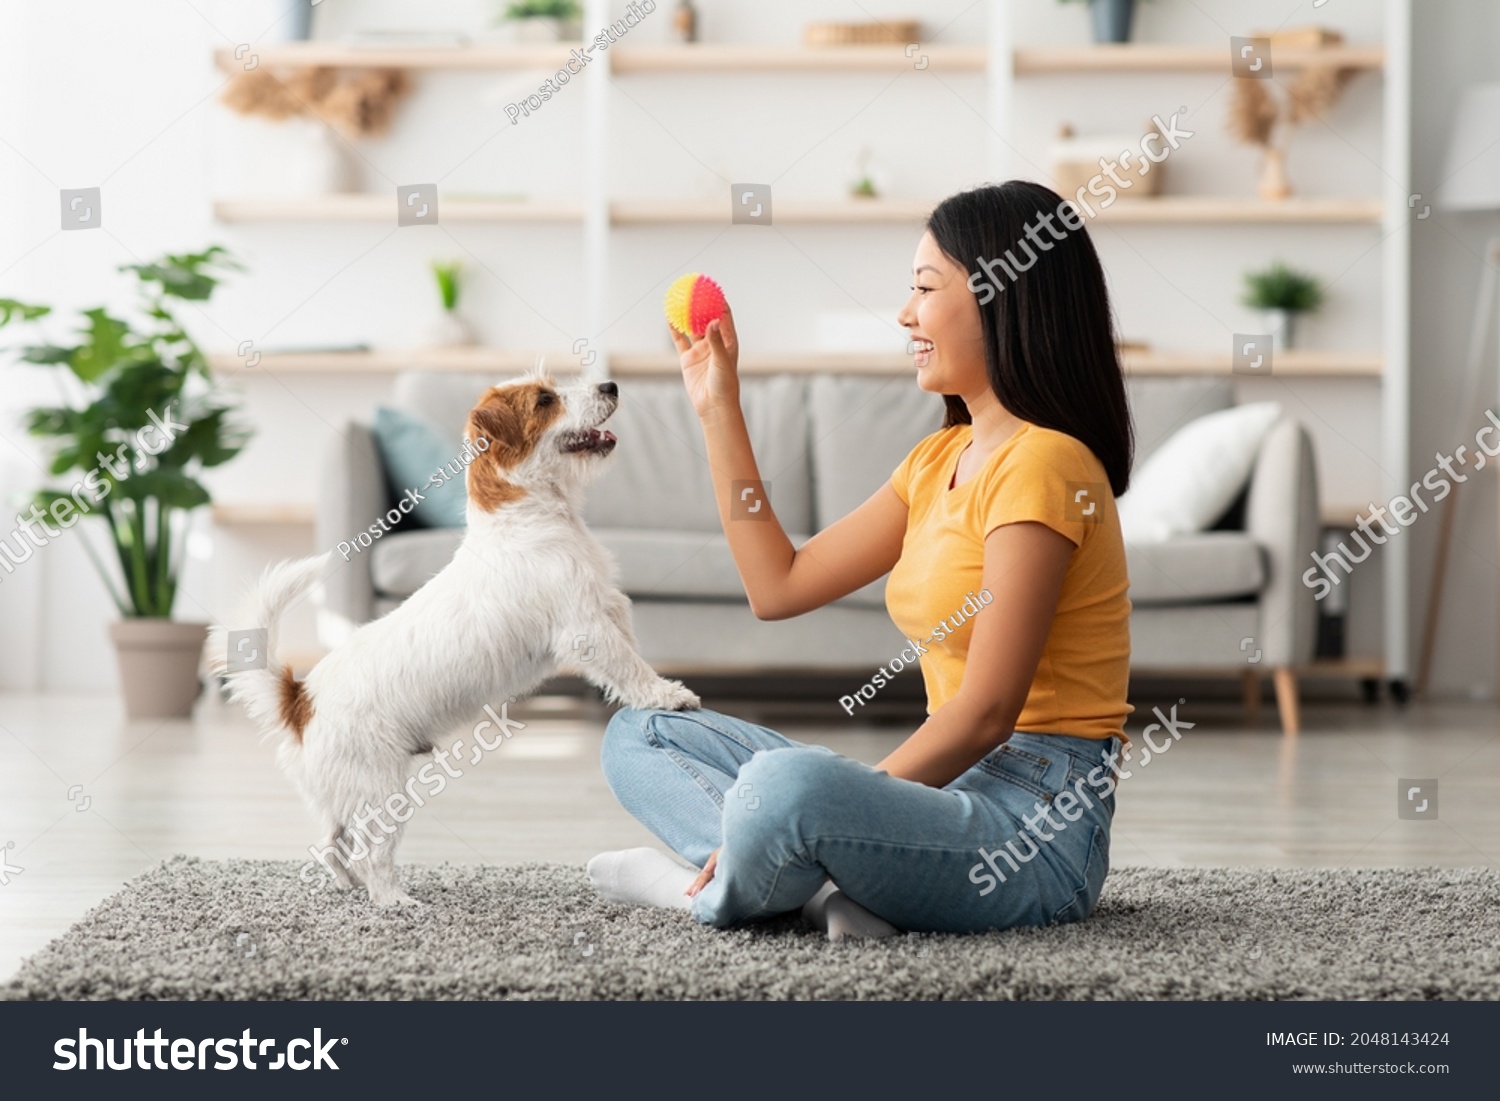 Female owner playing with joyful dog at home, happy young asian woman enjoying ball games with her cute fluffy jack russel terrier puppy, side view, copy space. Playing with dog concept #2048143424